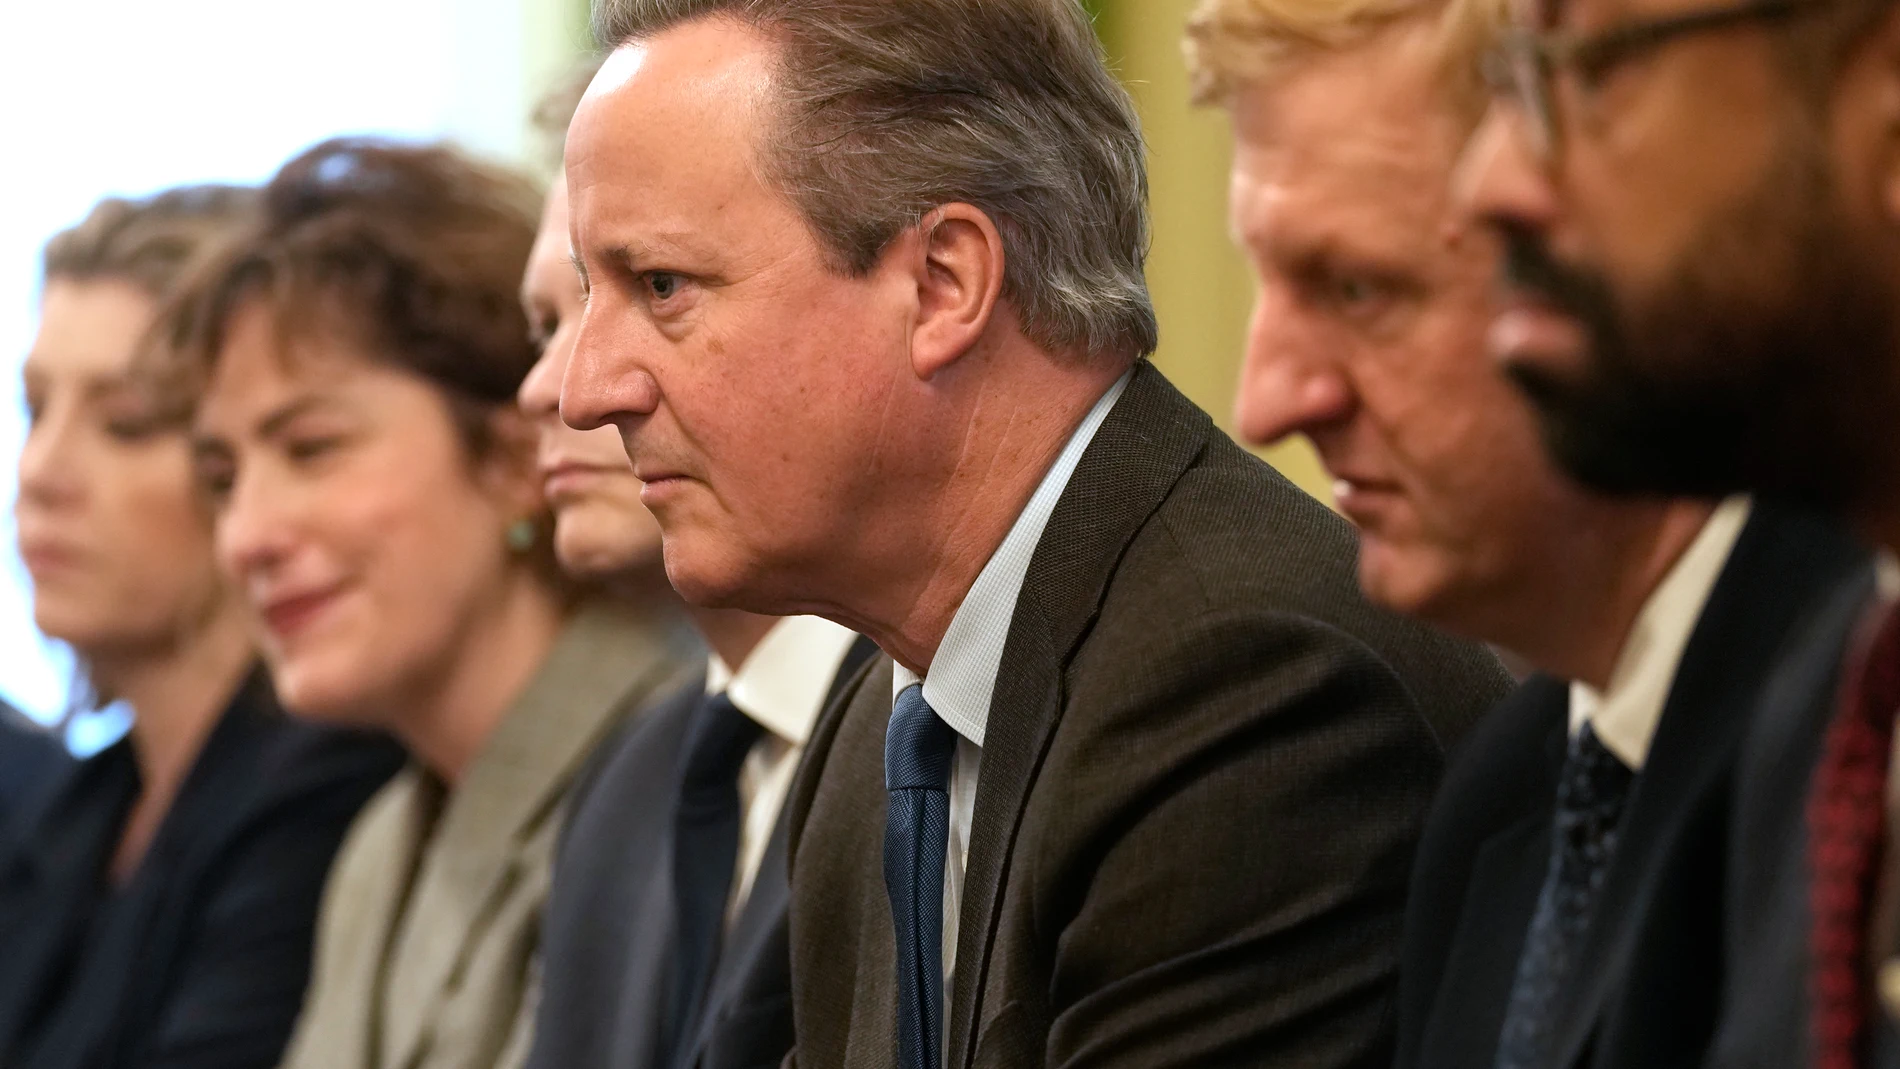 The new British Foreign Secretary David Cameron, third right attends a Cabinet meeting inside 10 Downing Street in London, Tuesday, Nov. 14, 2023. Cameron a former Prime Minister, was brought back into the cabinet during reshuffle by Prime Minister Rishi Sunak, on Monday. (AP Photo/Kin Cheung,Pool)